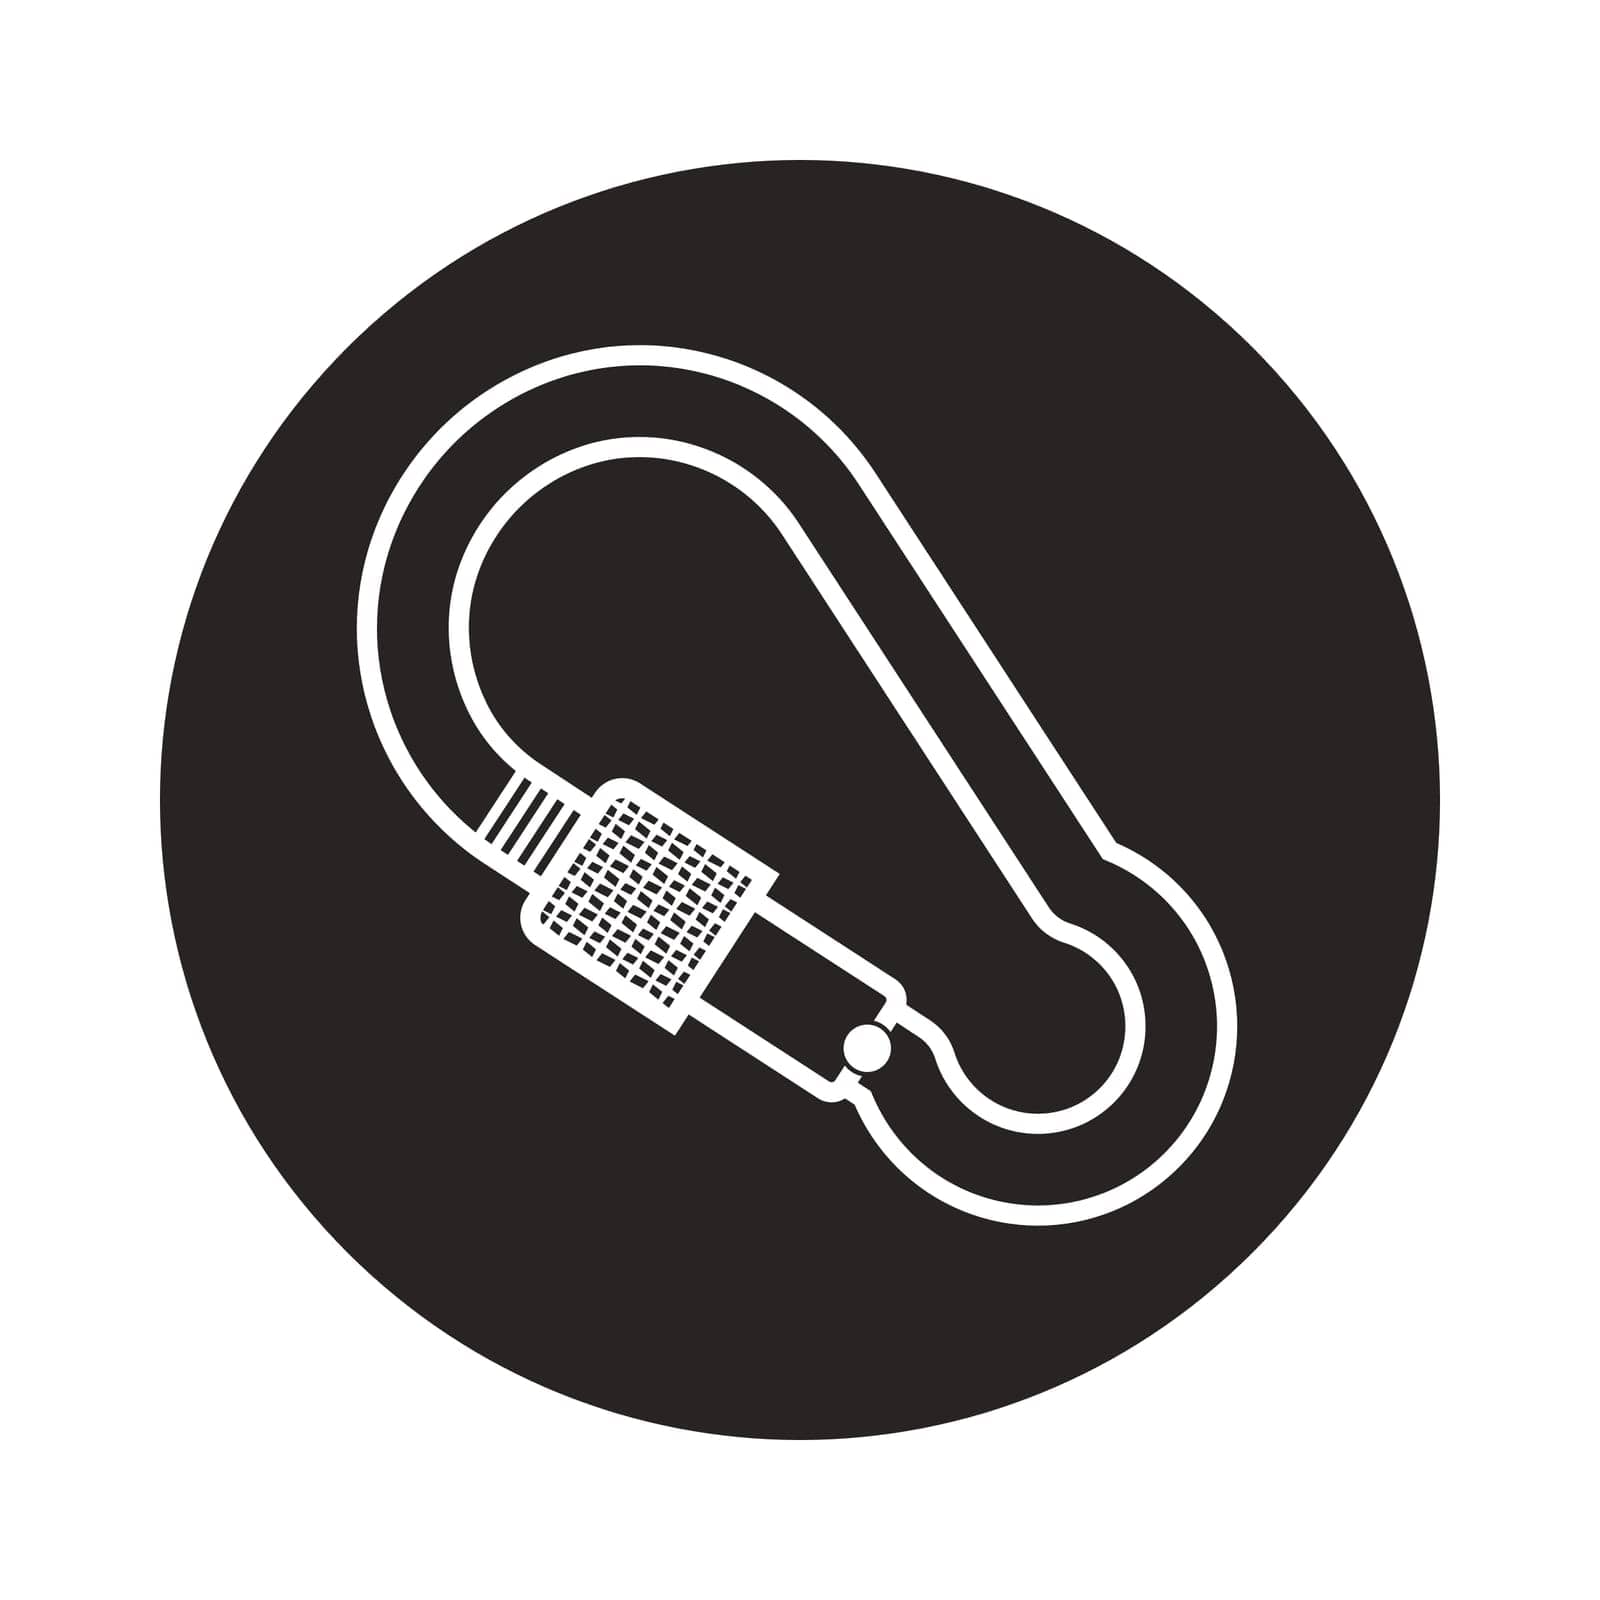 Mountain equipment Carabiner icon by rnking